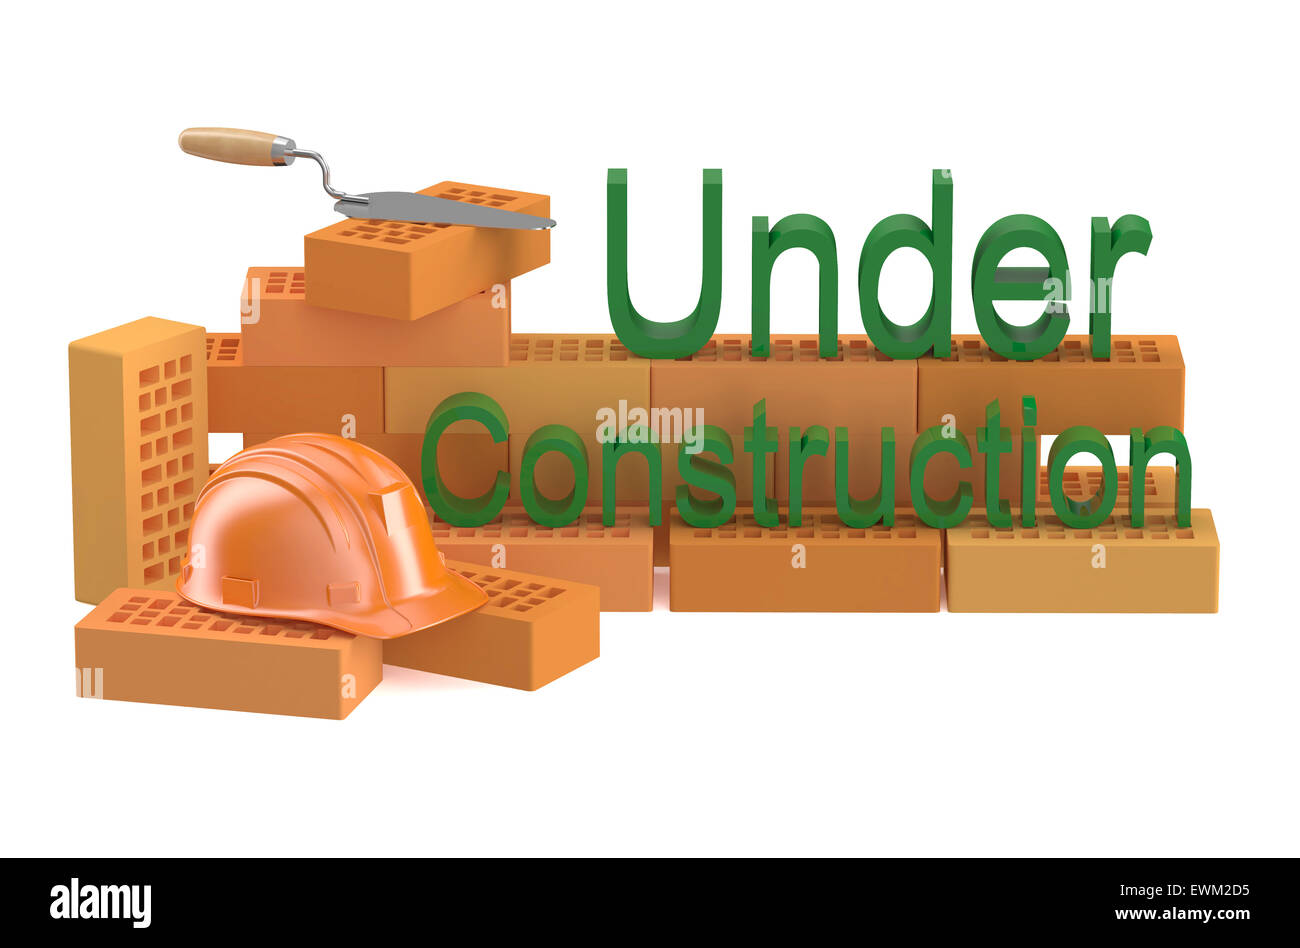 under construction and building concept isolated on white background Stock Photo